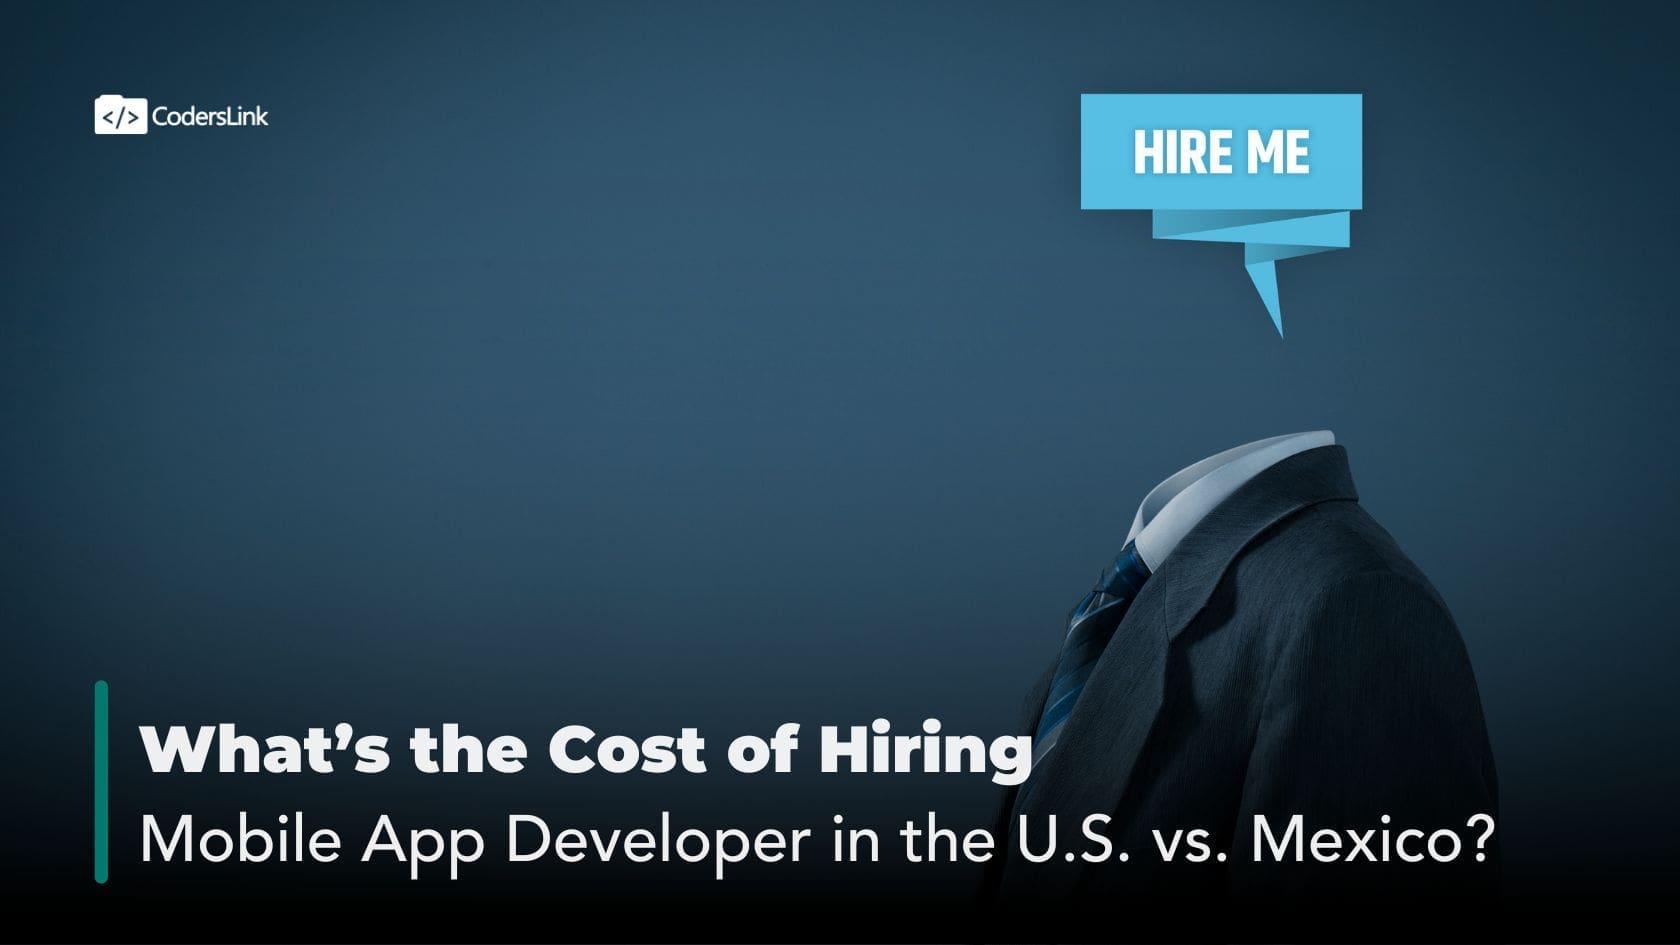 What’s the Cost of Hiring a Mobile App Developer in the U.S. vs. Mexico?